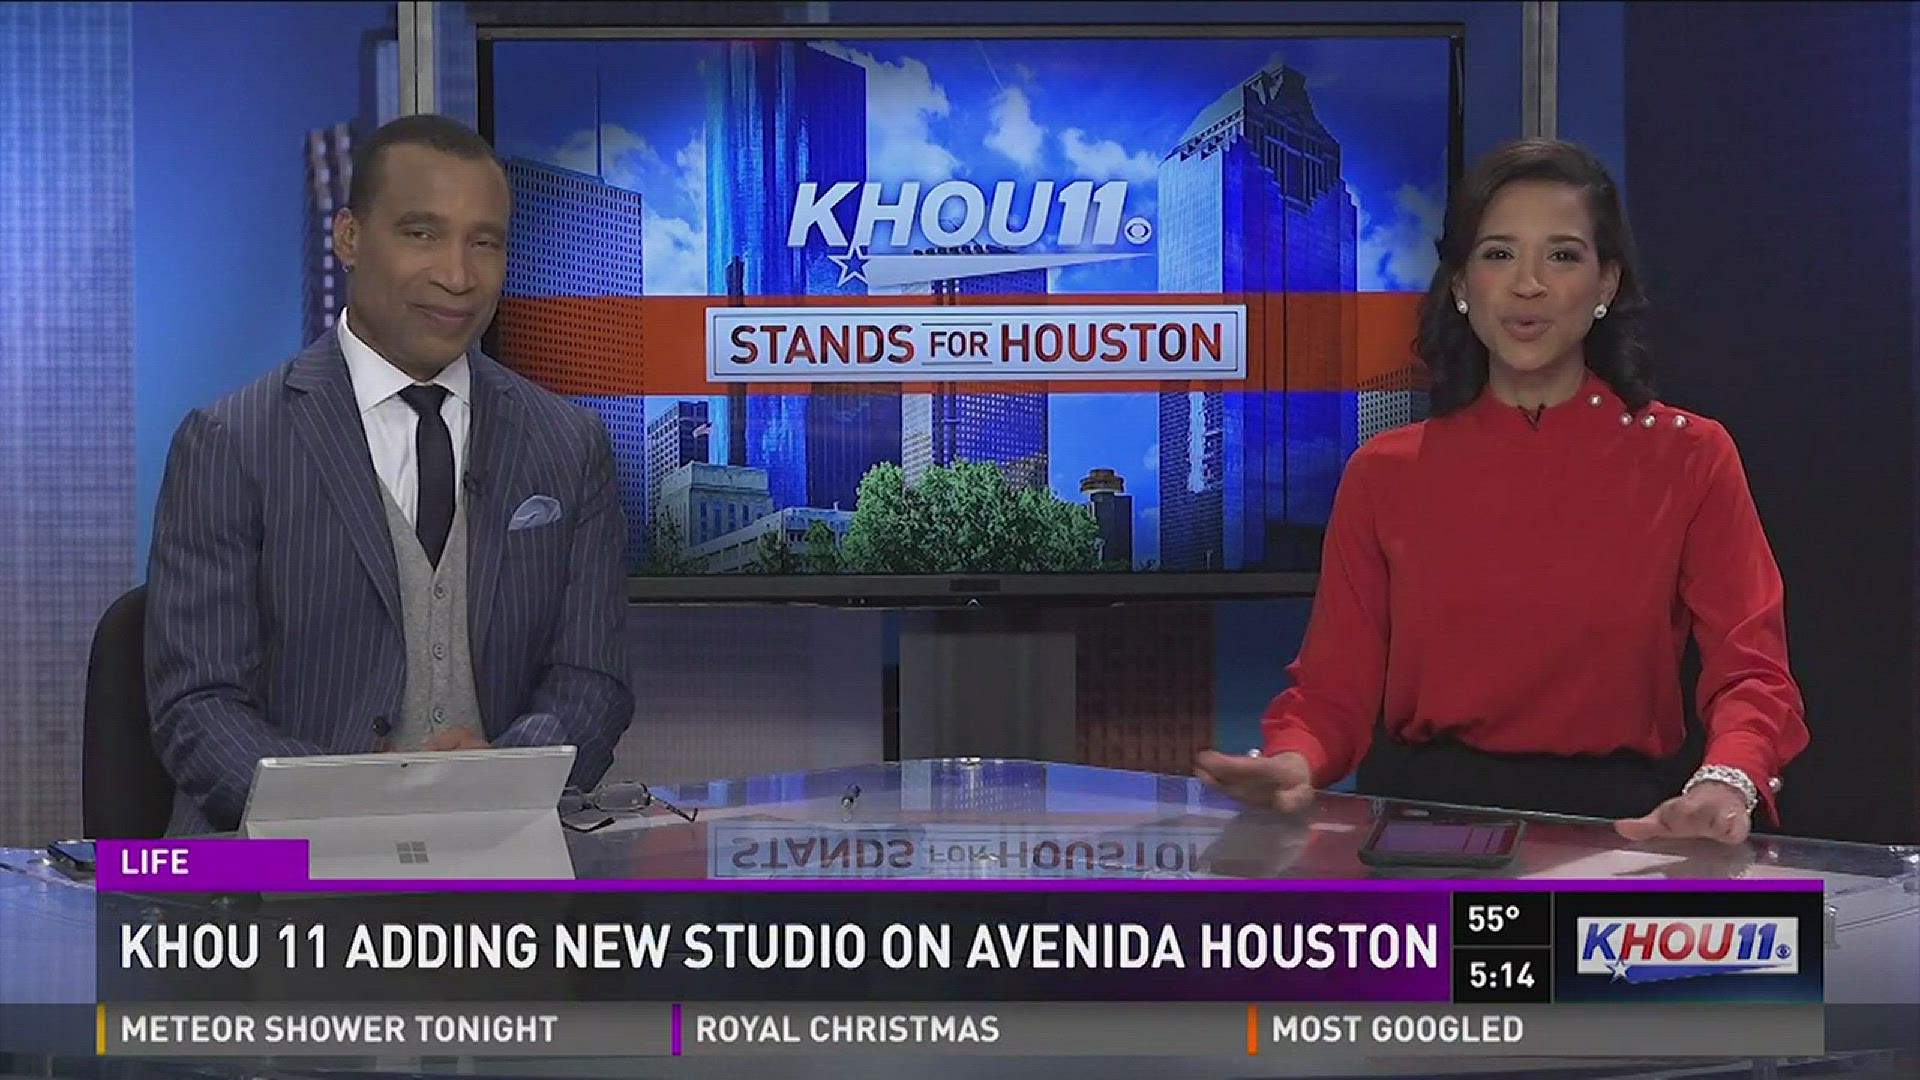 Houston First Corporation and KHOU 11 announced their partnership Wednesday to deliver the city's first TV news satellite studio in downtown to be located along Avenida Houston and slated to open in March 2018.